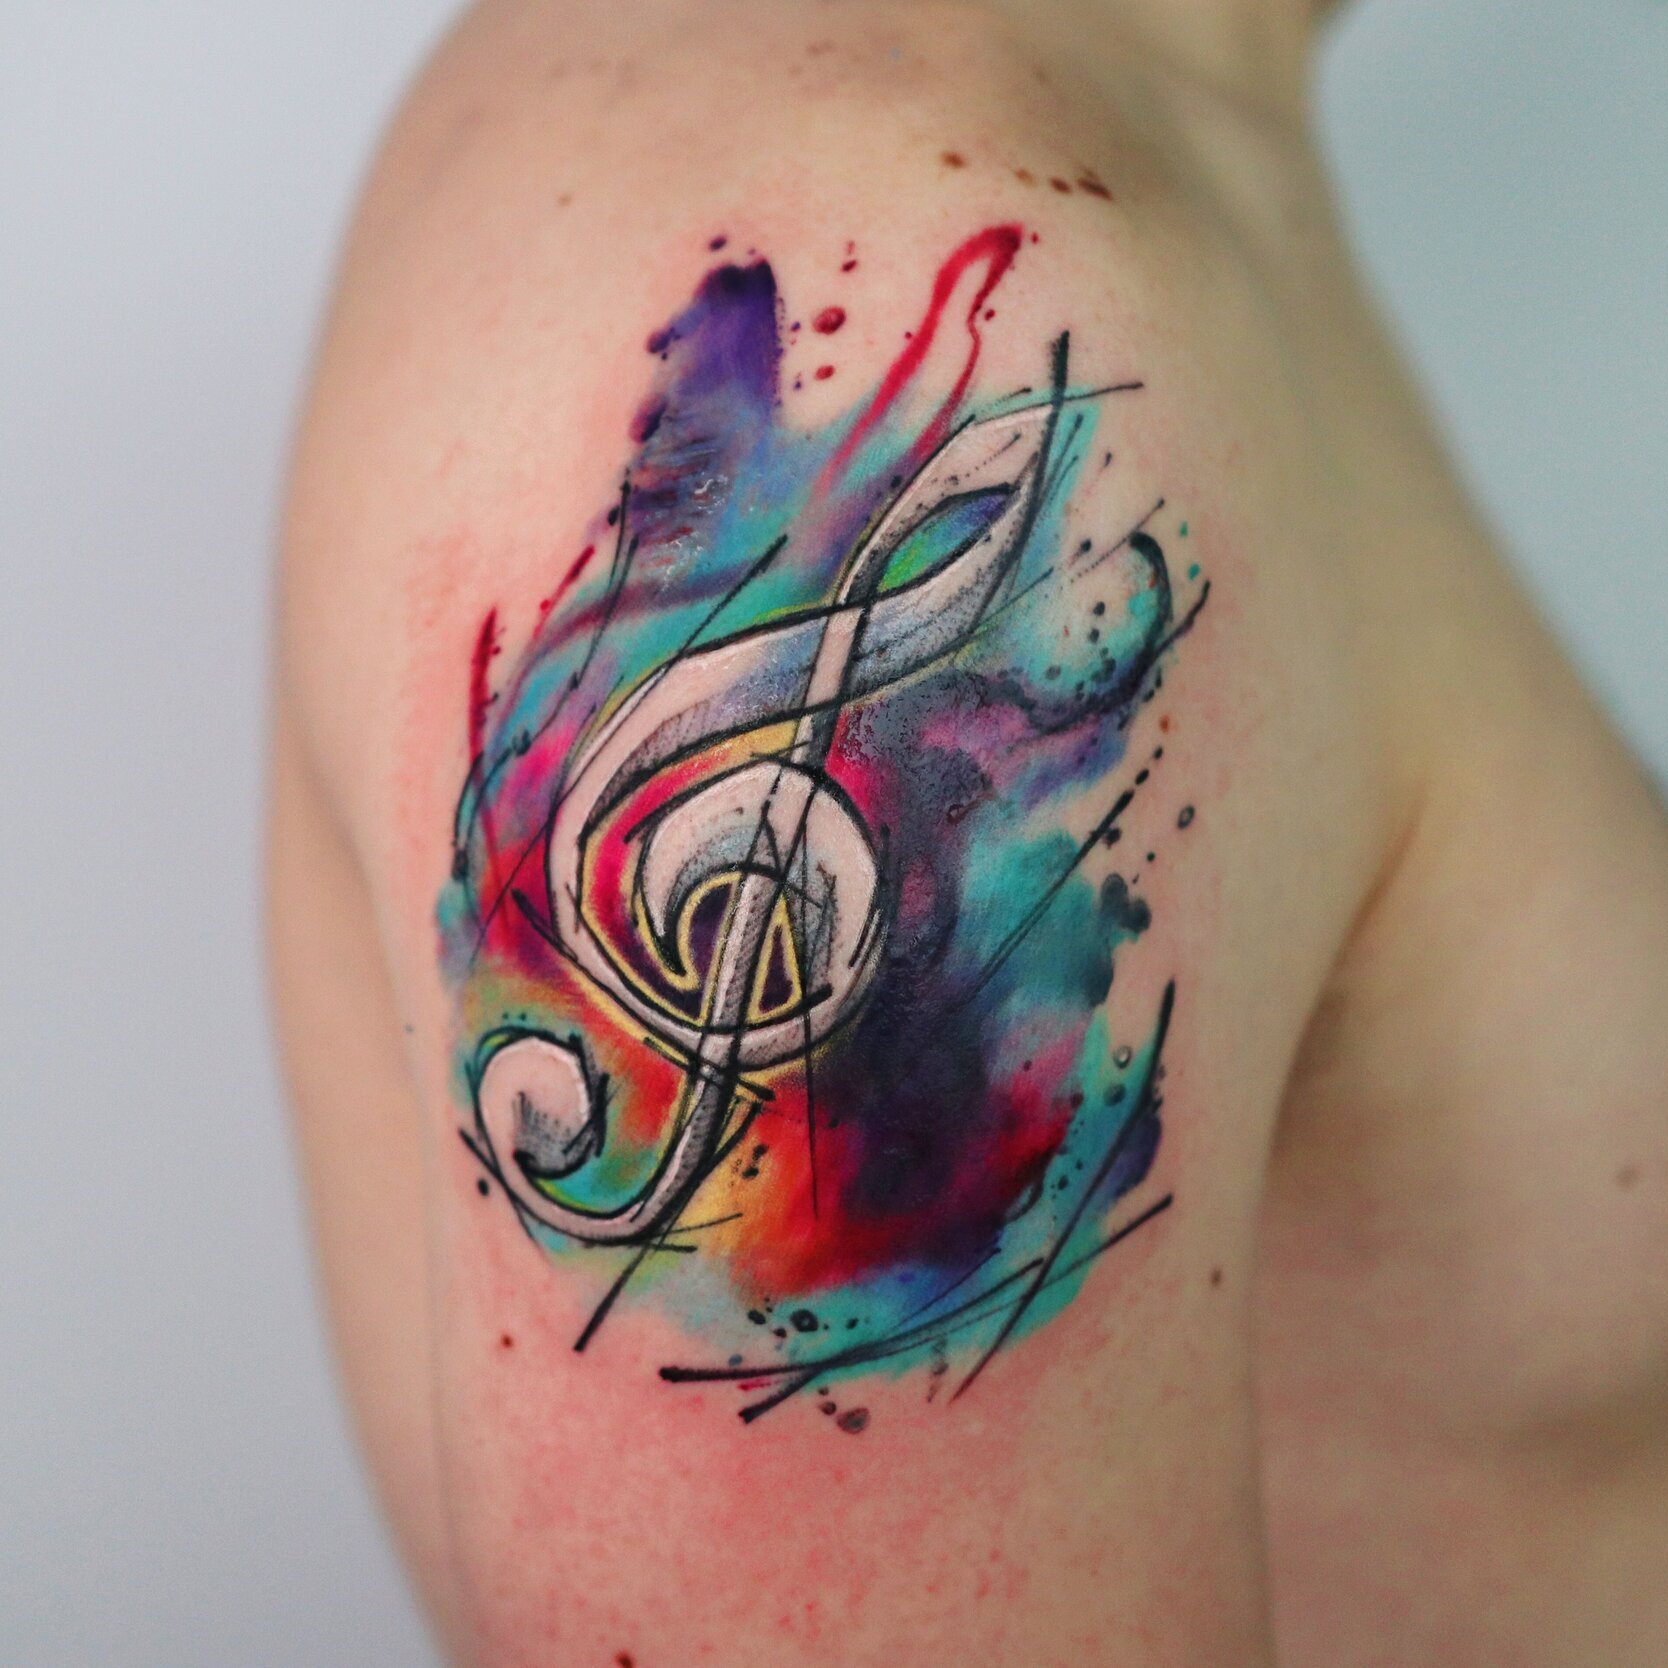 Watercolour music note tattoo by Nico